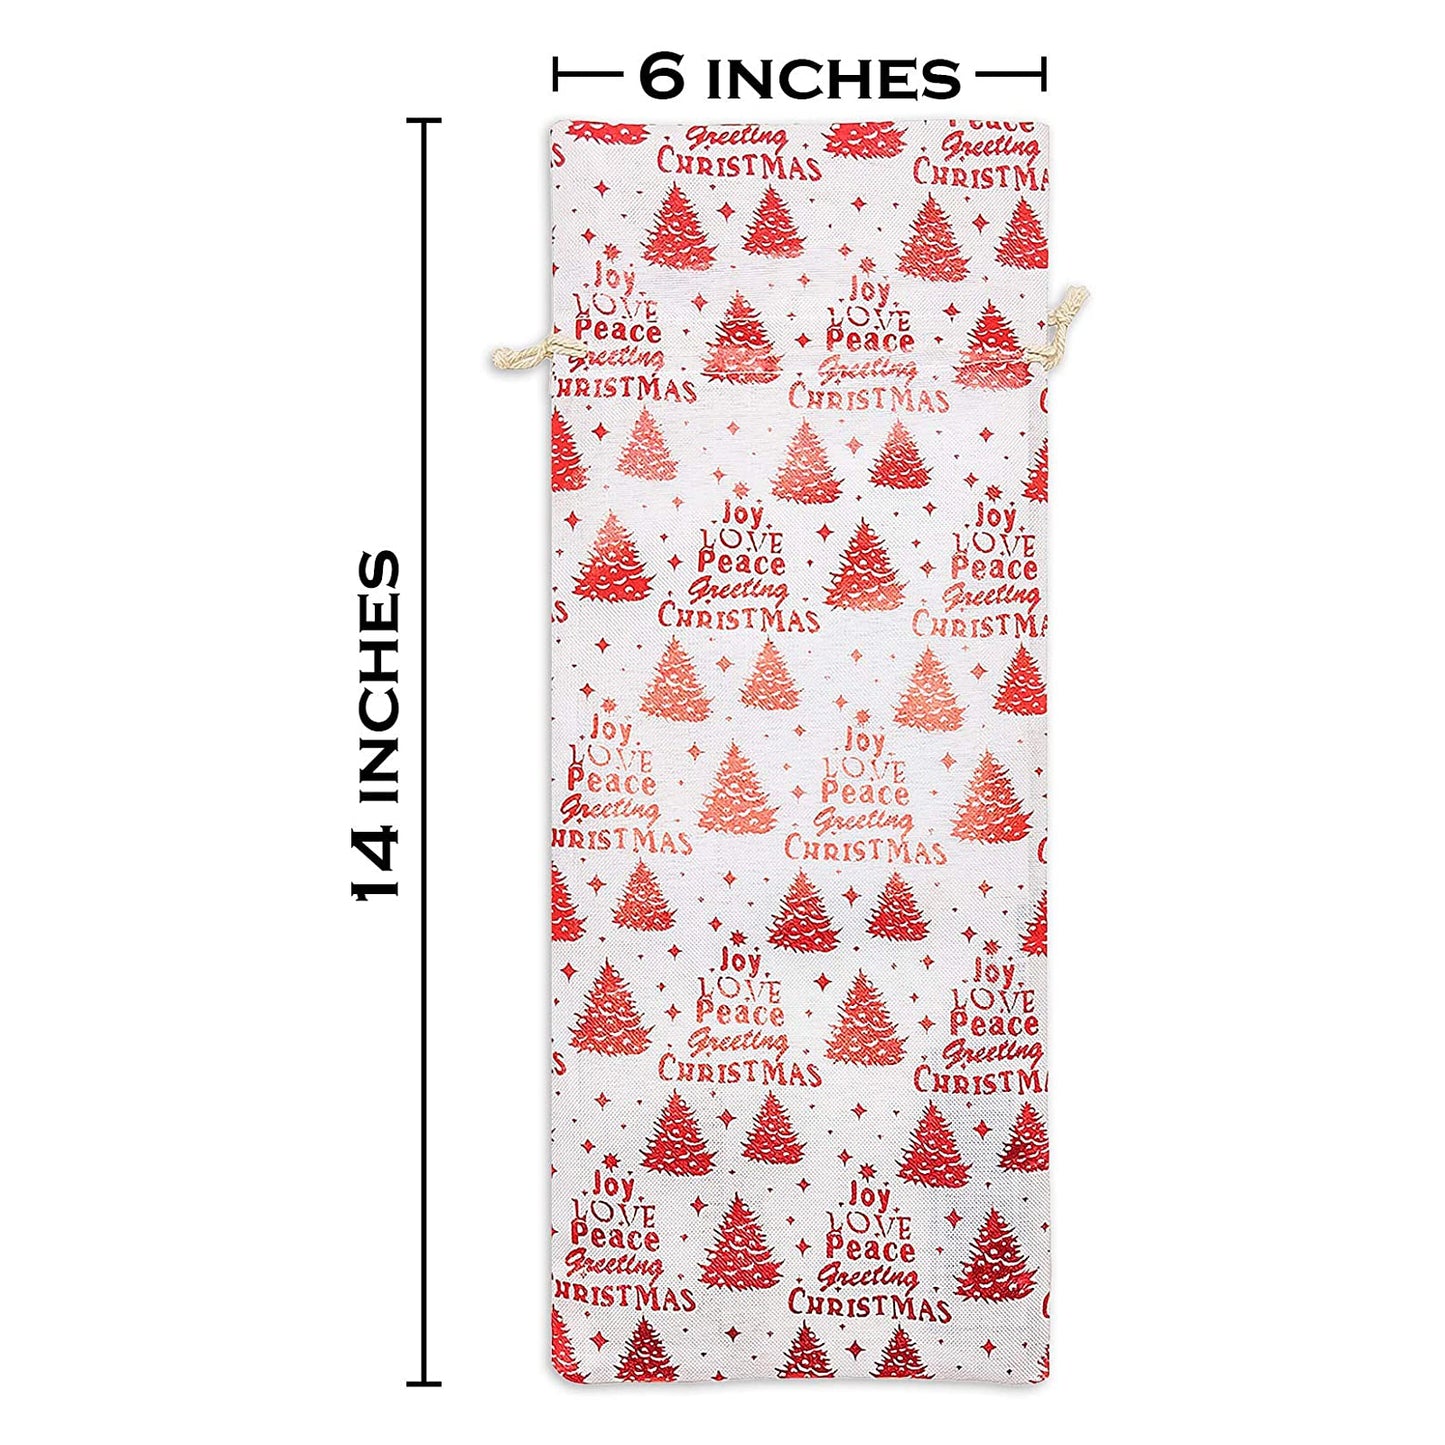 6" x 14" Cotton Muslin Red Christmas Tree Wine Bottle Drawstring Gift Bags